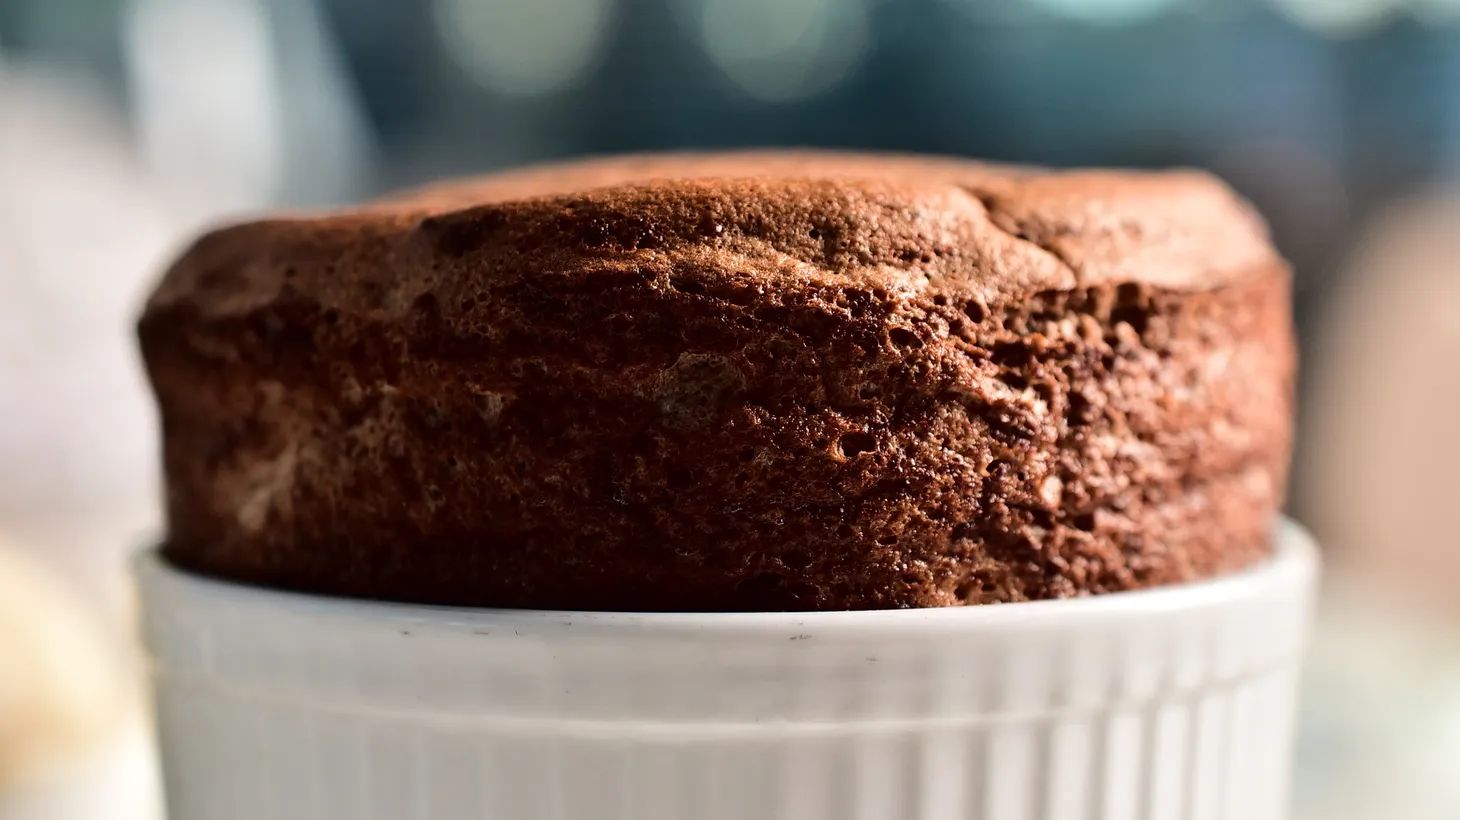 Even if you don’t master the classic high rise of a chocolate soufflé, it will still make you swoon.